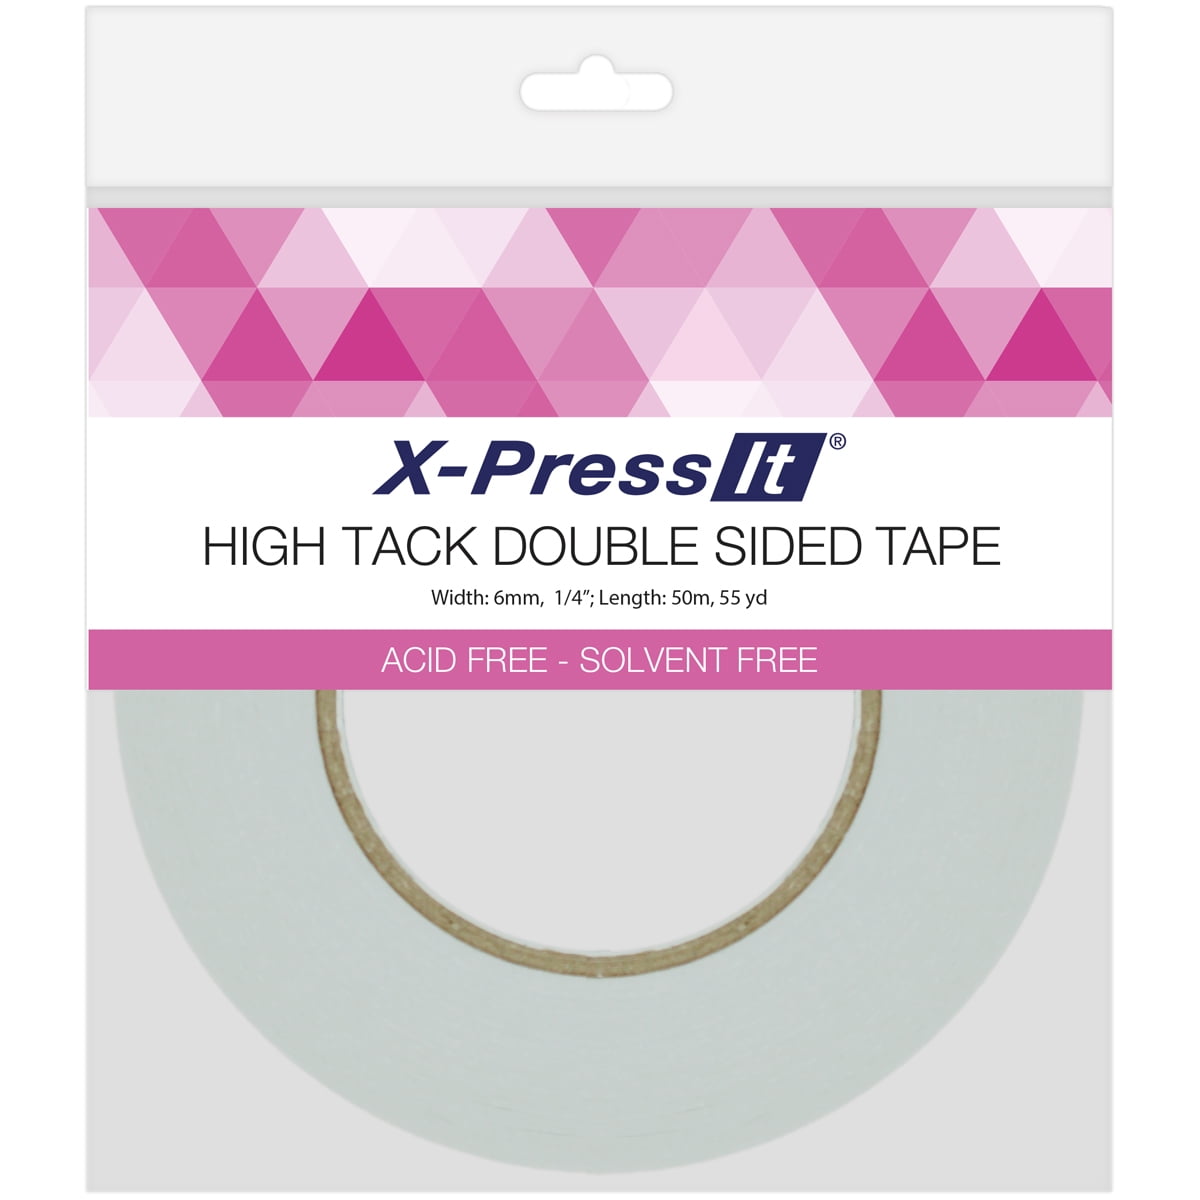 Double Sided Tape • Shop American Threads Women's Trendy Online